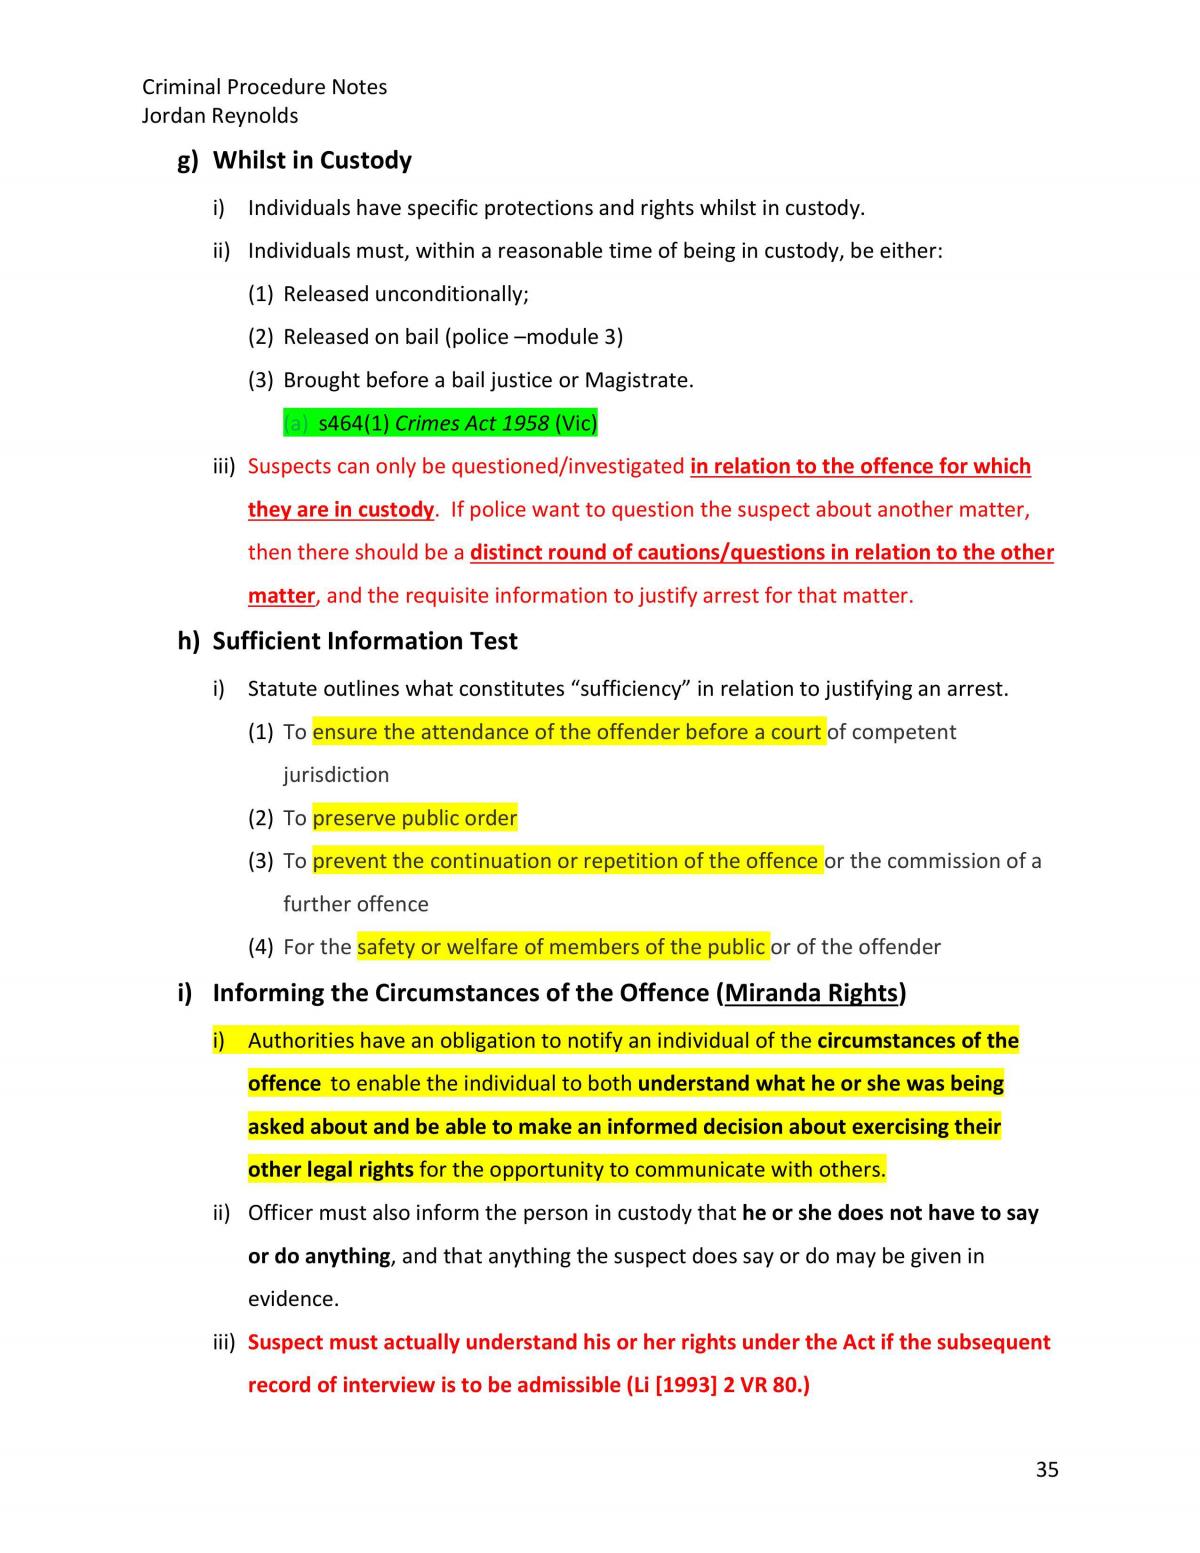 Criminal Procedure and Sentencing - Complete Notes - Page 35